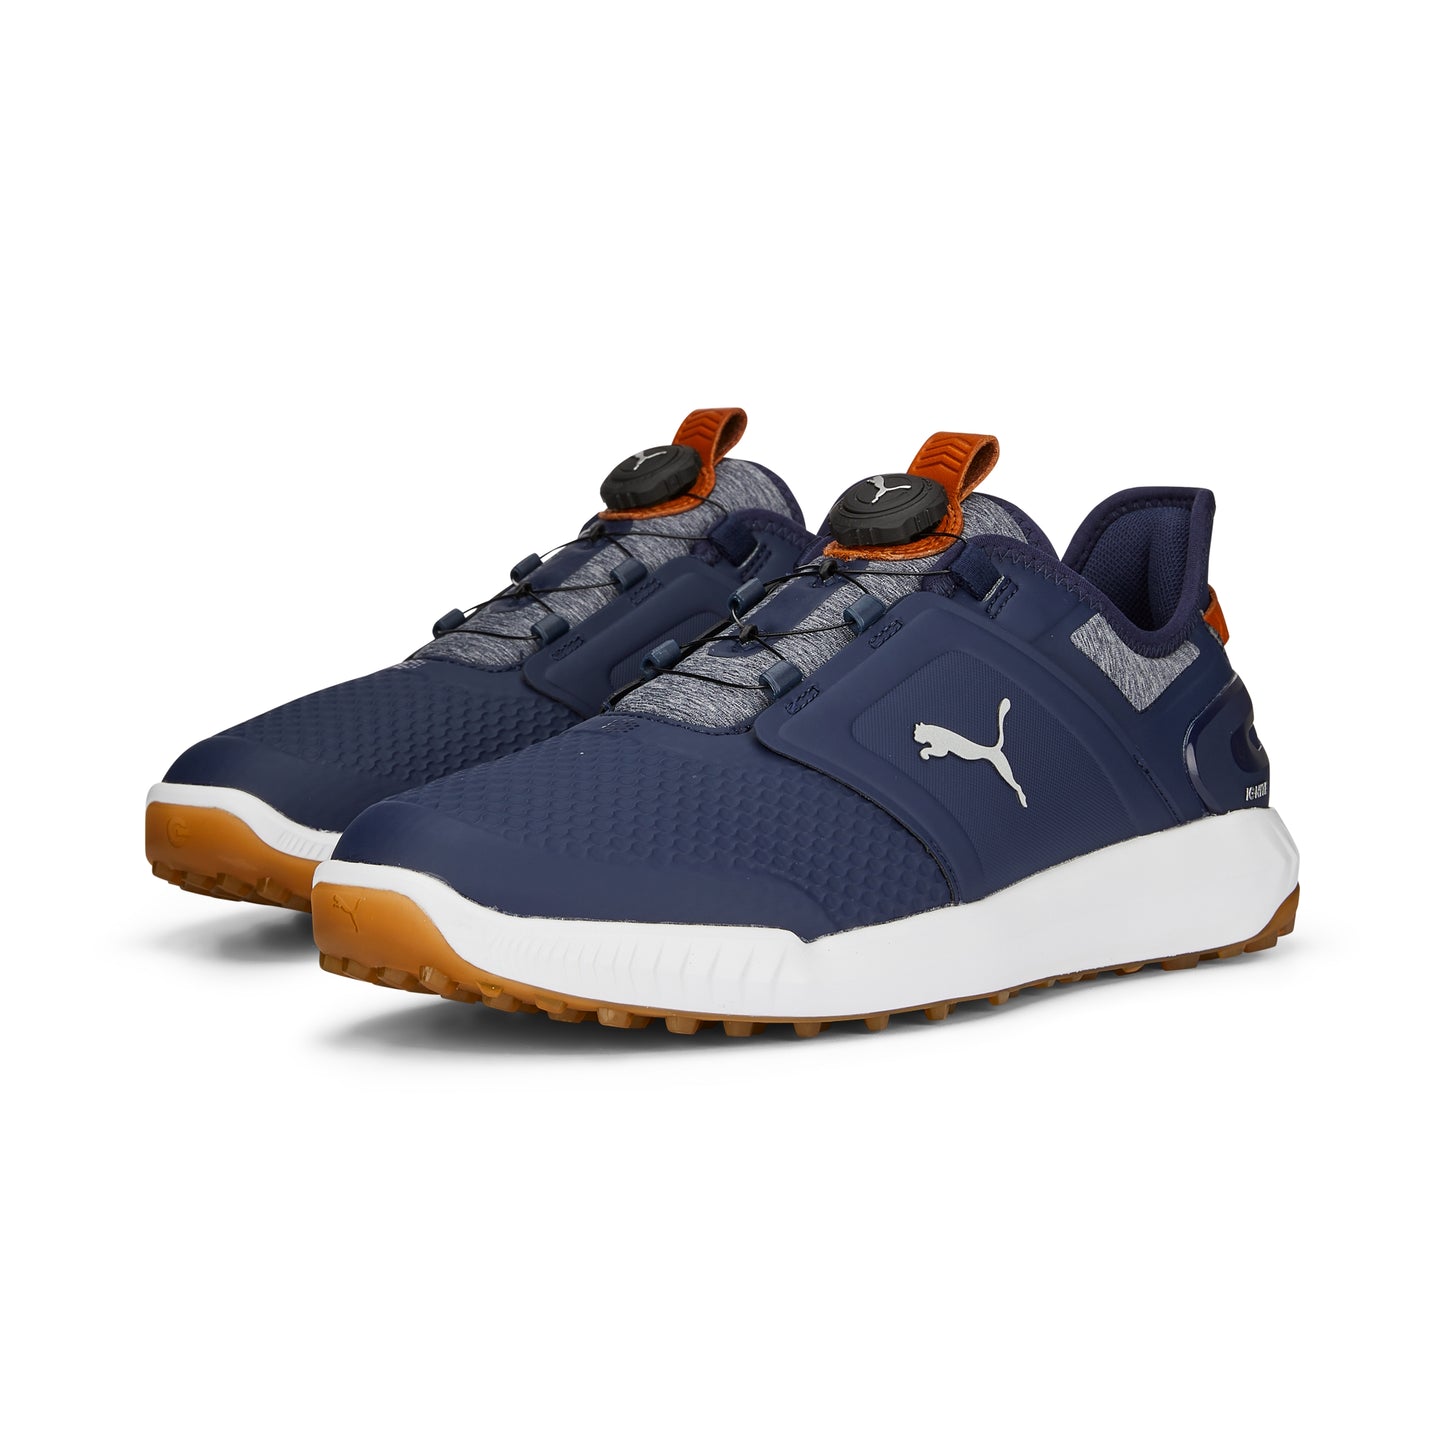 Puma Men's Ignite Elevate Disc Spikeless Golf Shoes - Navy/Silver